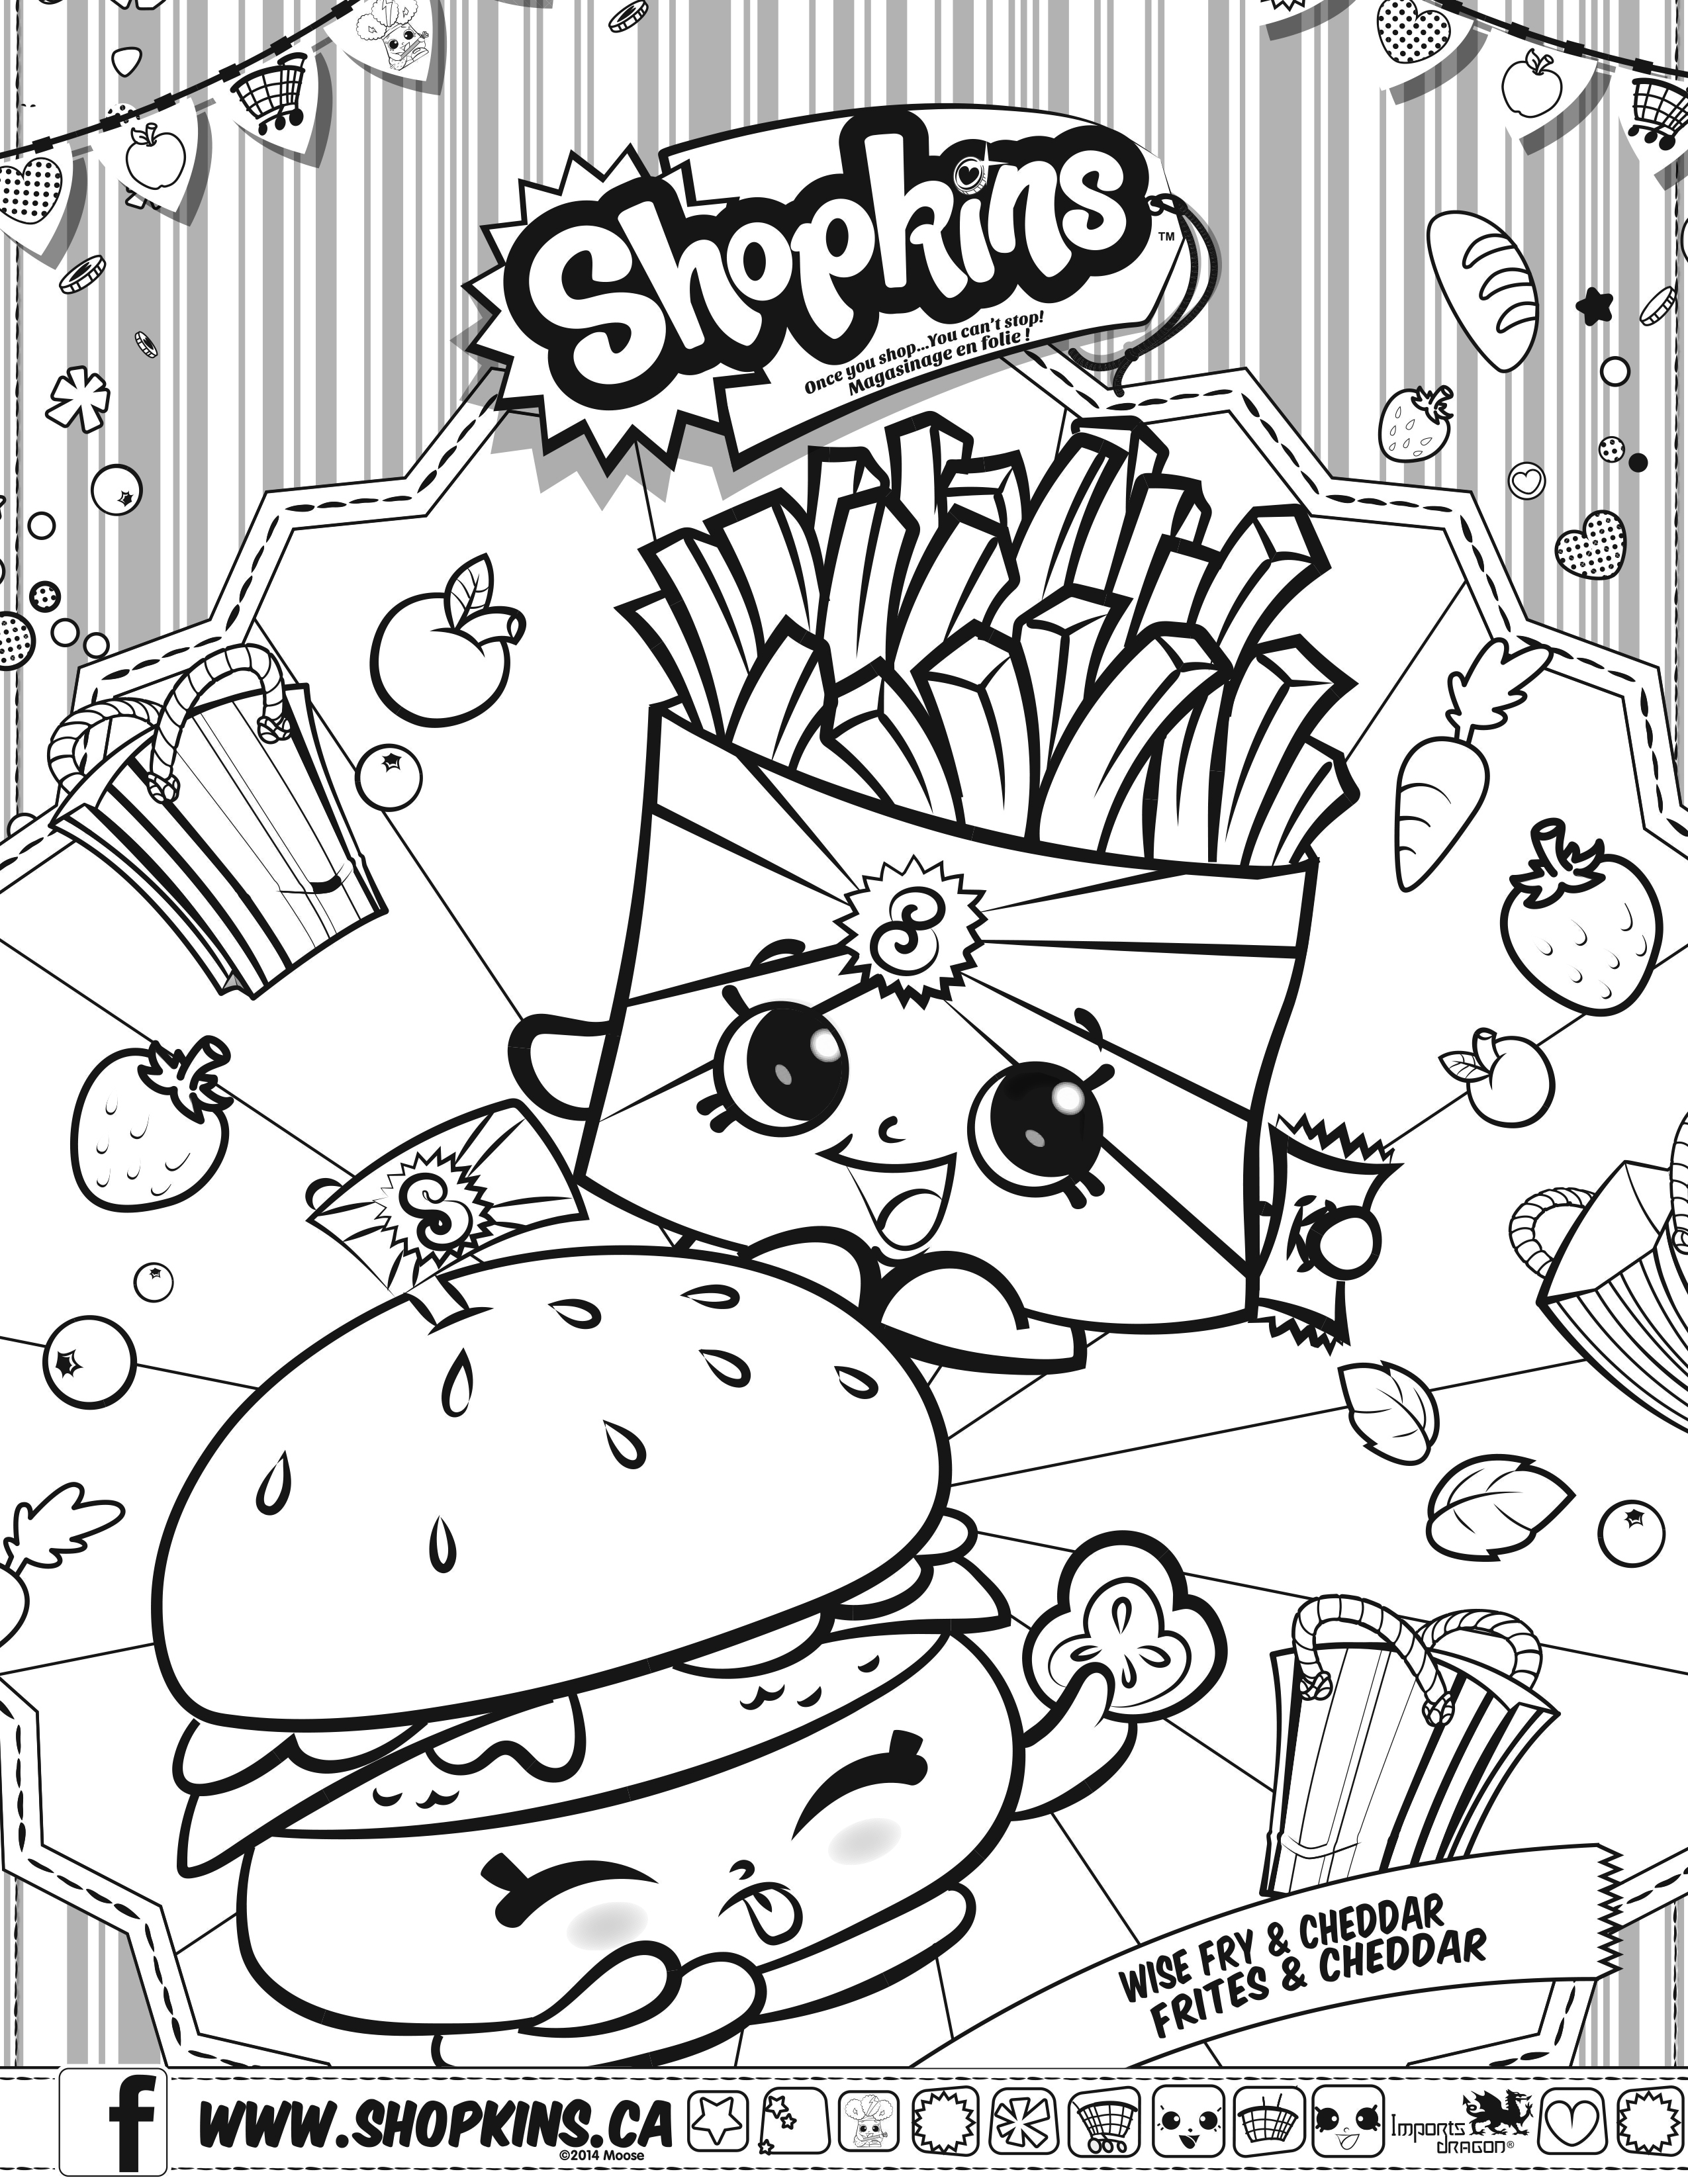 171 Simple Shopkins Coloring Pages To Print with Animal character